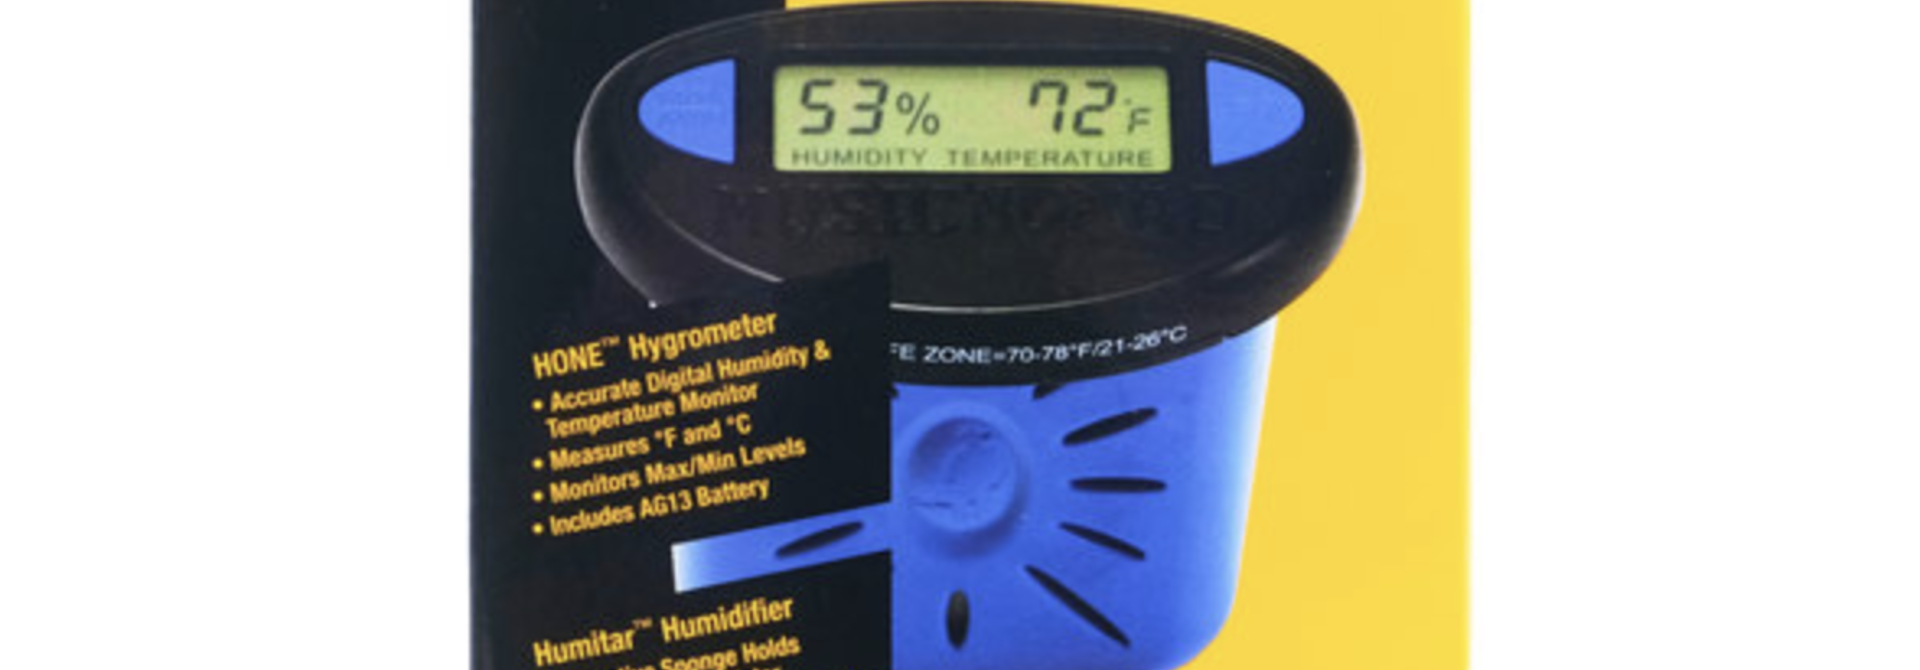 The Humitar ONE - Acoustic Guitar Humidifier & Hygrometer